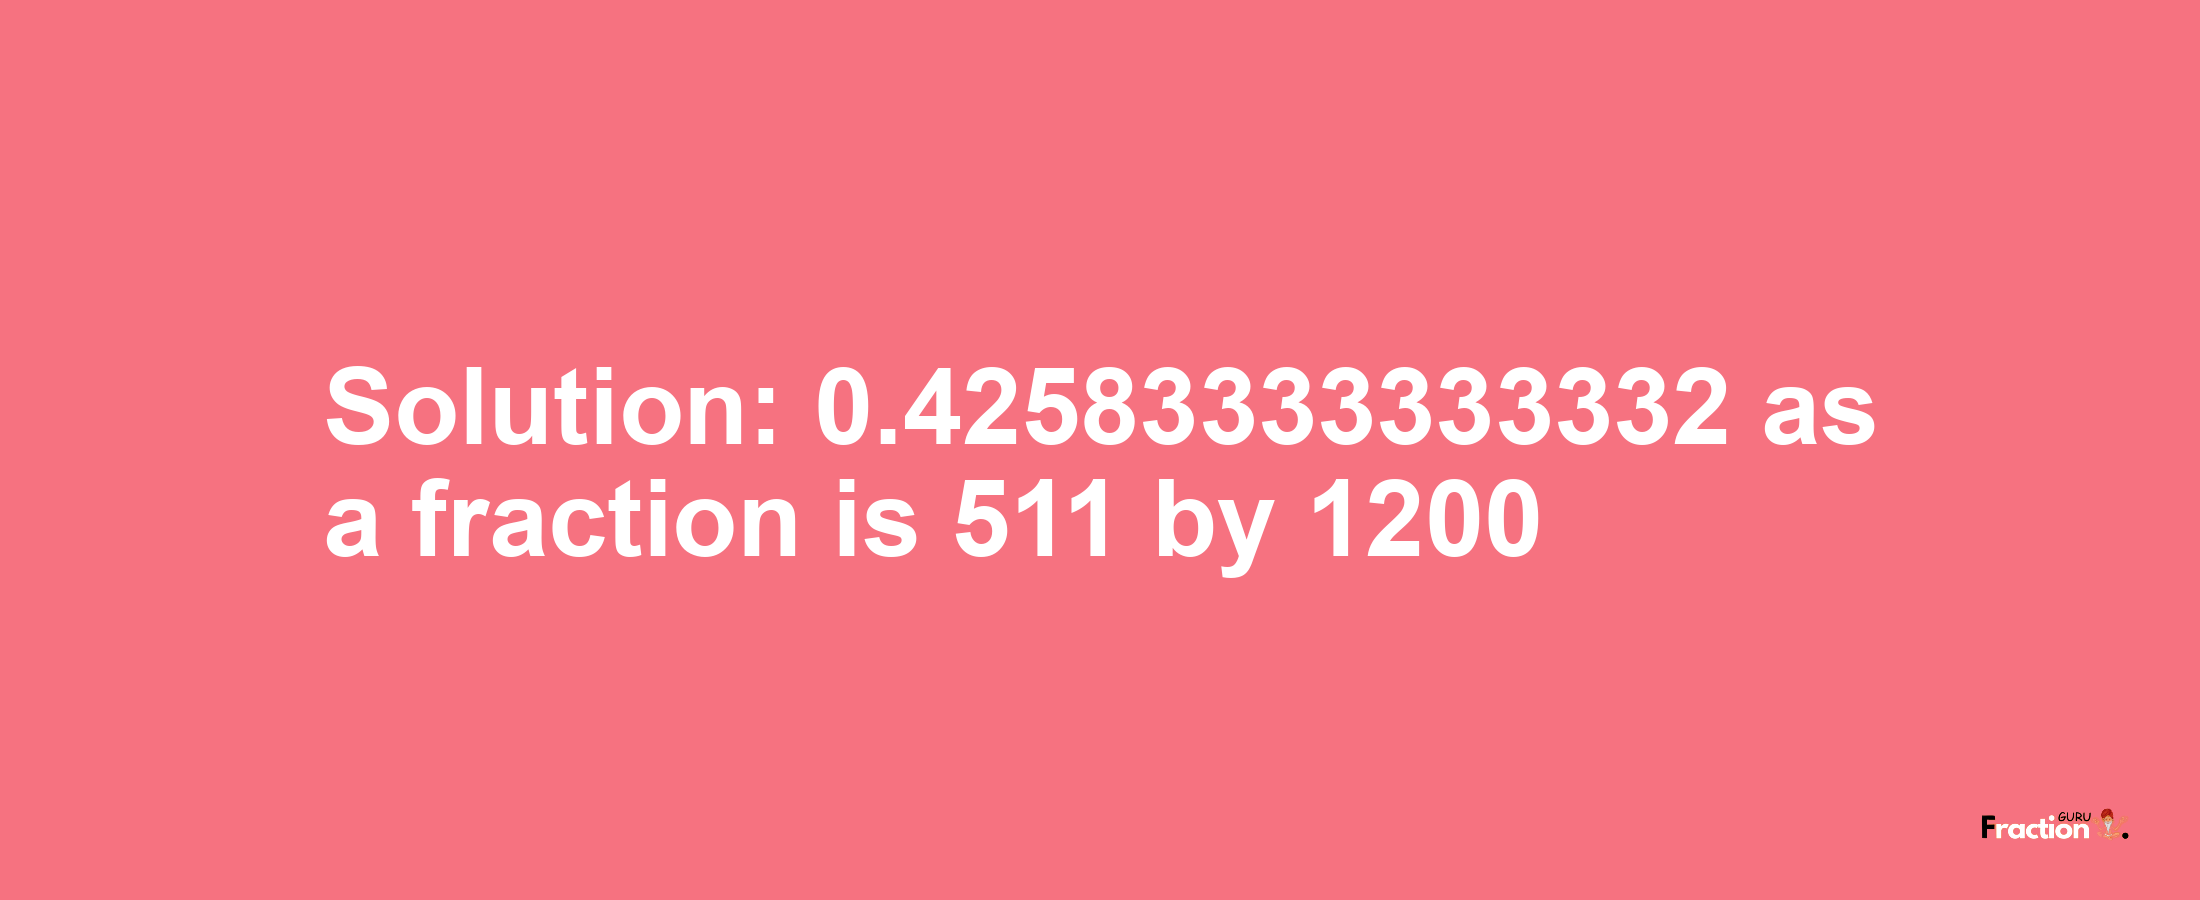 Solution:0.42583333333332 as a fraction is 511/1200